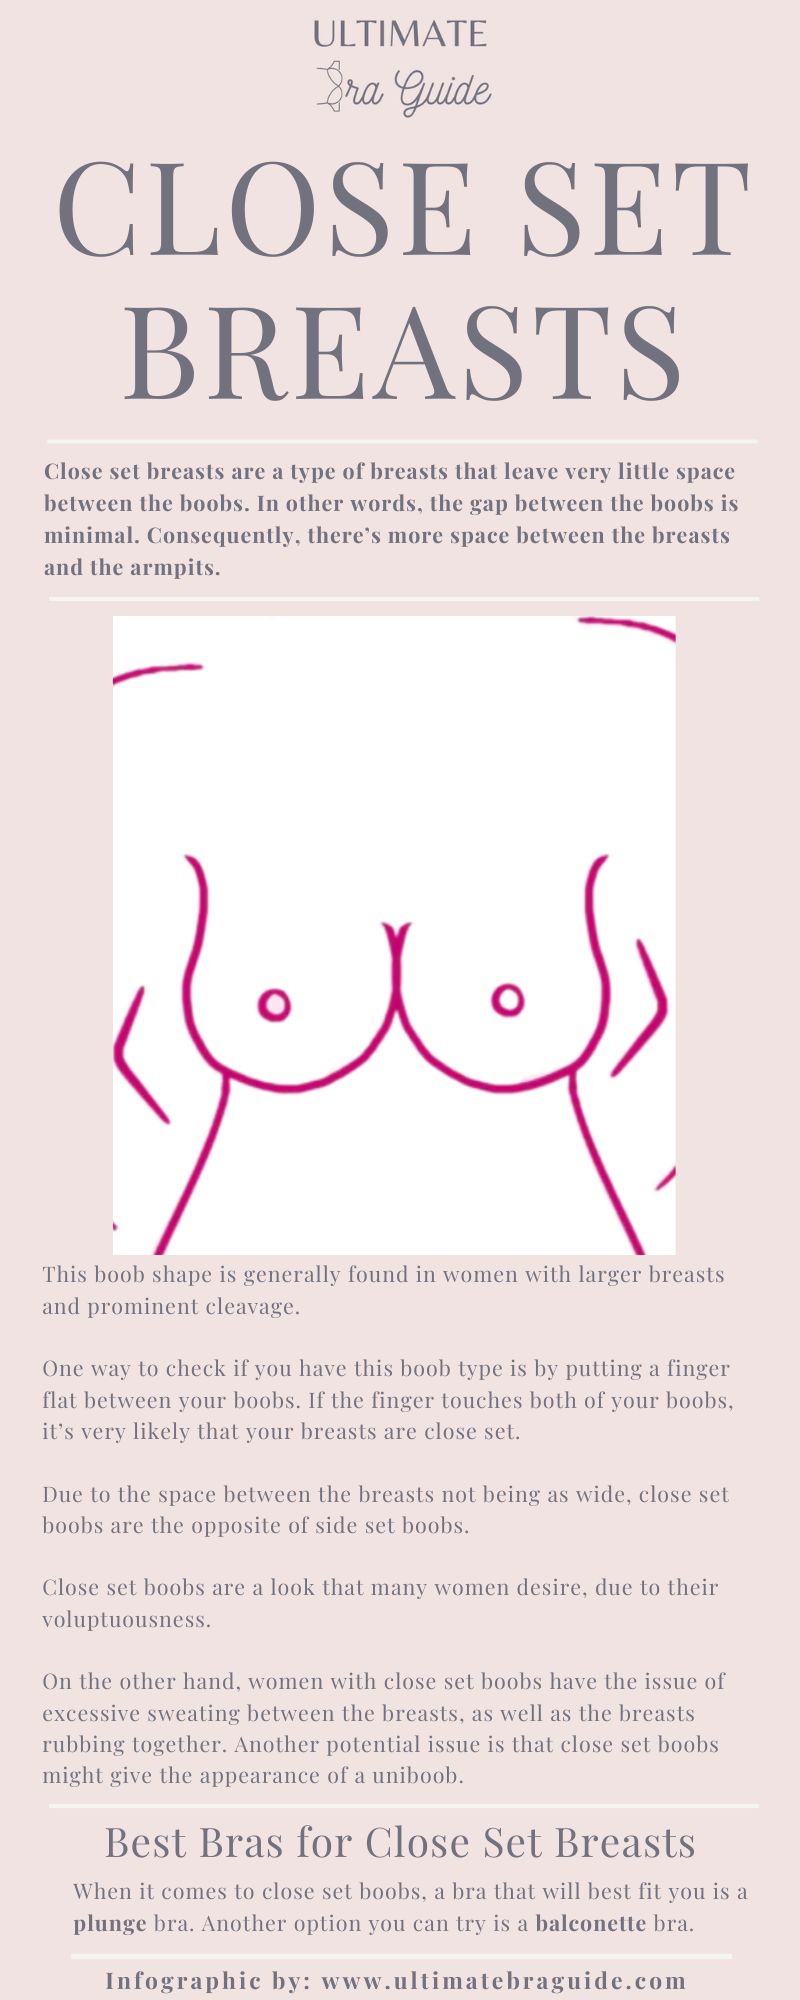 An infographic about close set breasts - what they are, what they look like, what are the best bras for them